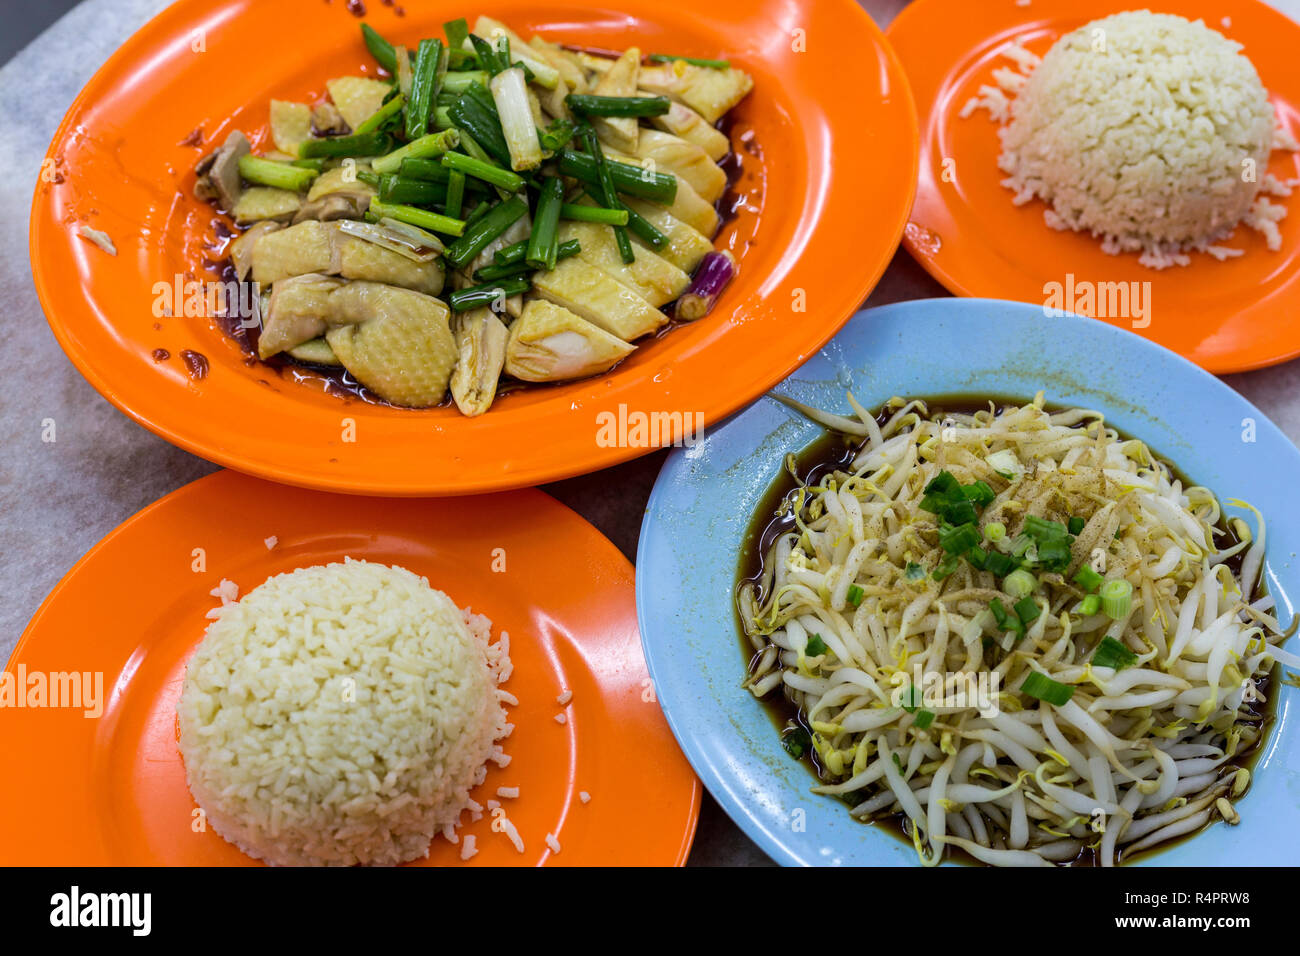 Malaysian Cuisine: Chicken, Rice, and Bean Sprouts, a Local Specialty.  Ipoh, Malaysia. Stock Photo